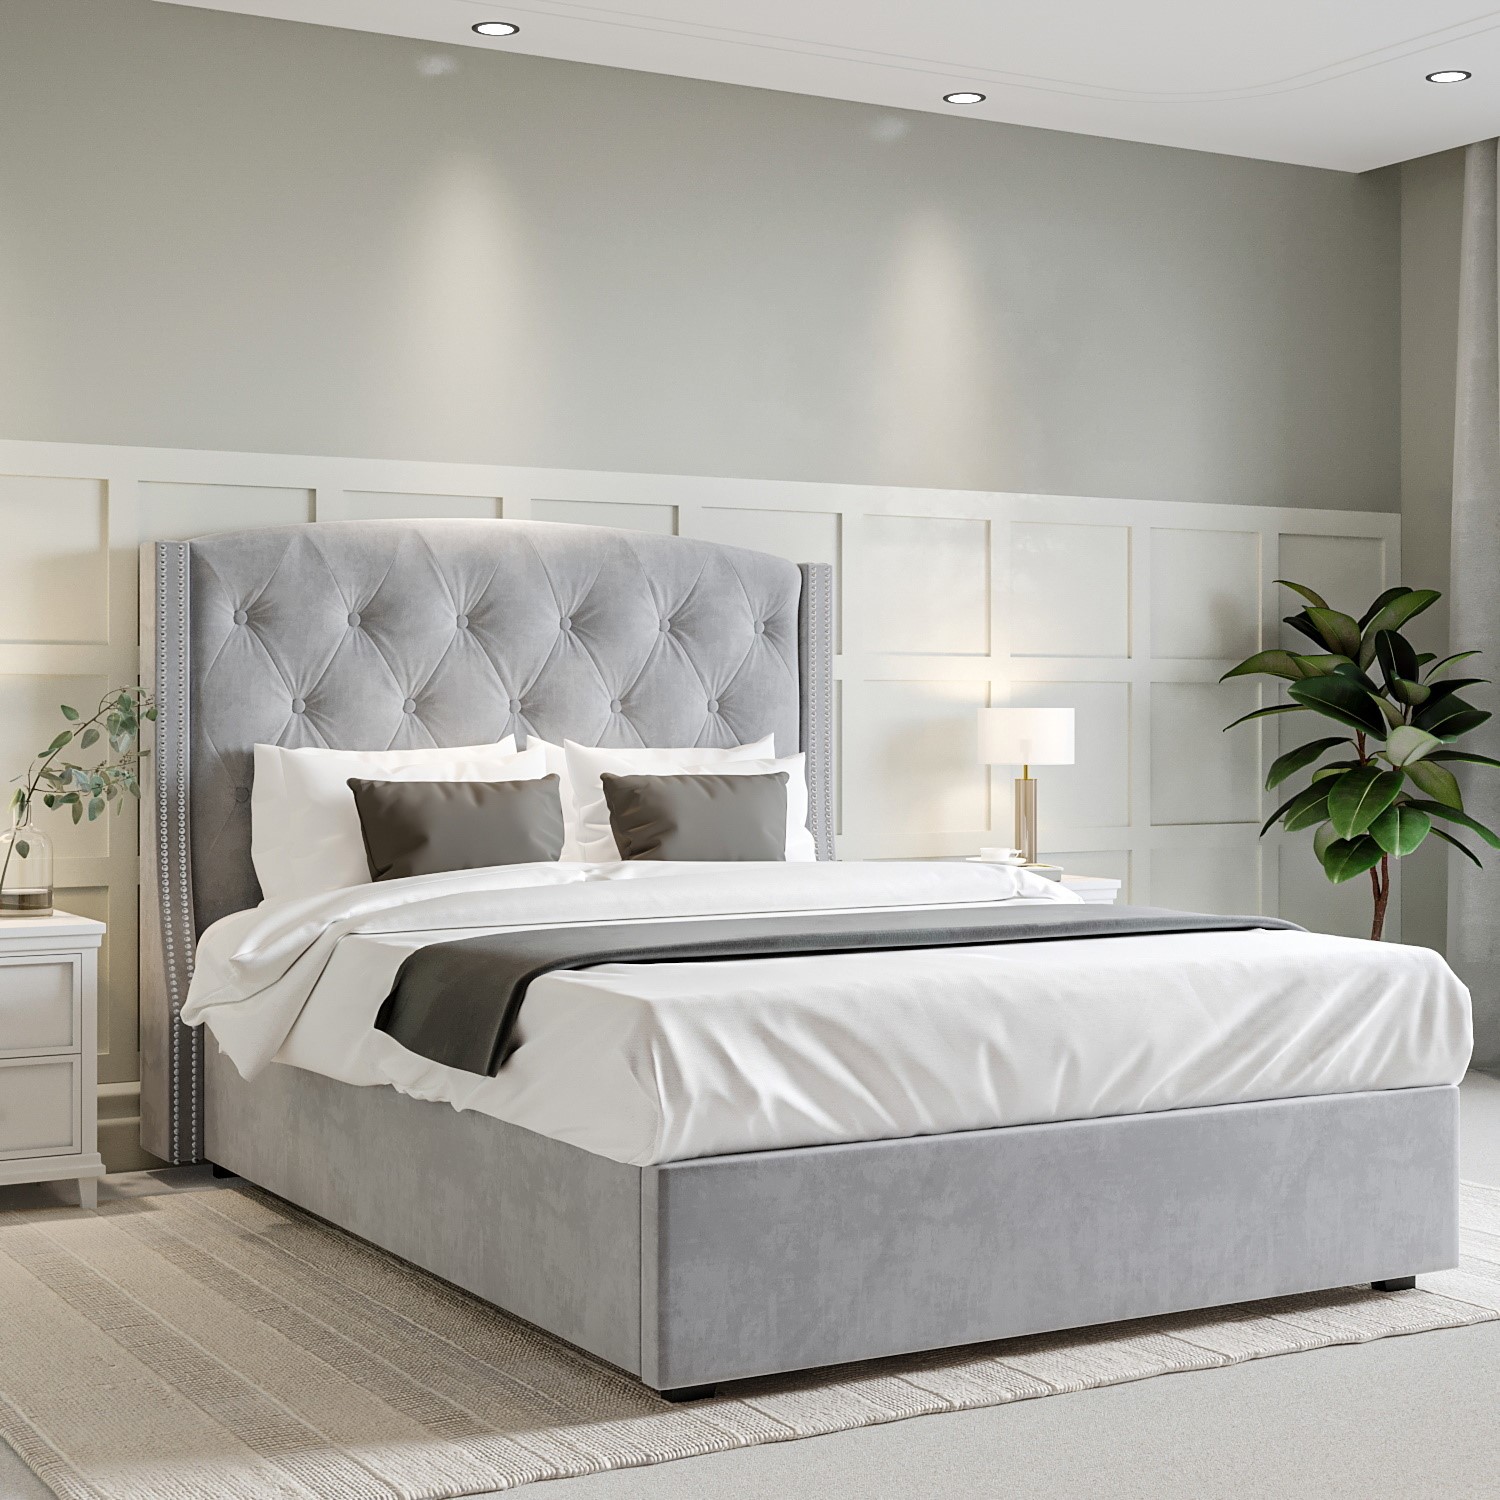 Photo of Grey velvet double ottoman bed with chesterfield studded headboard - safina